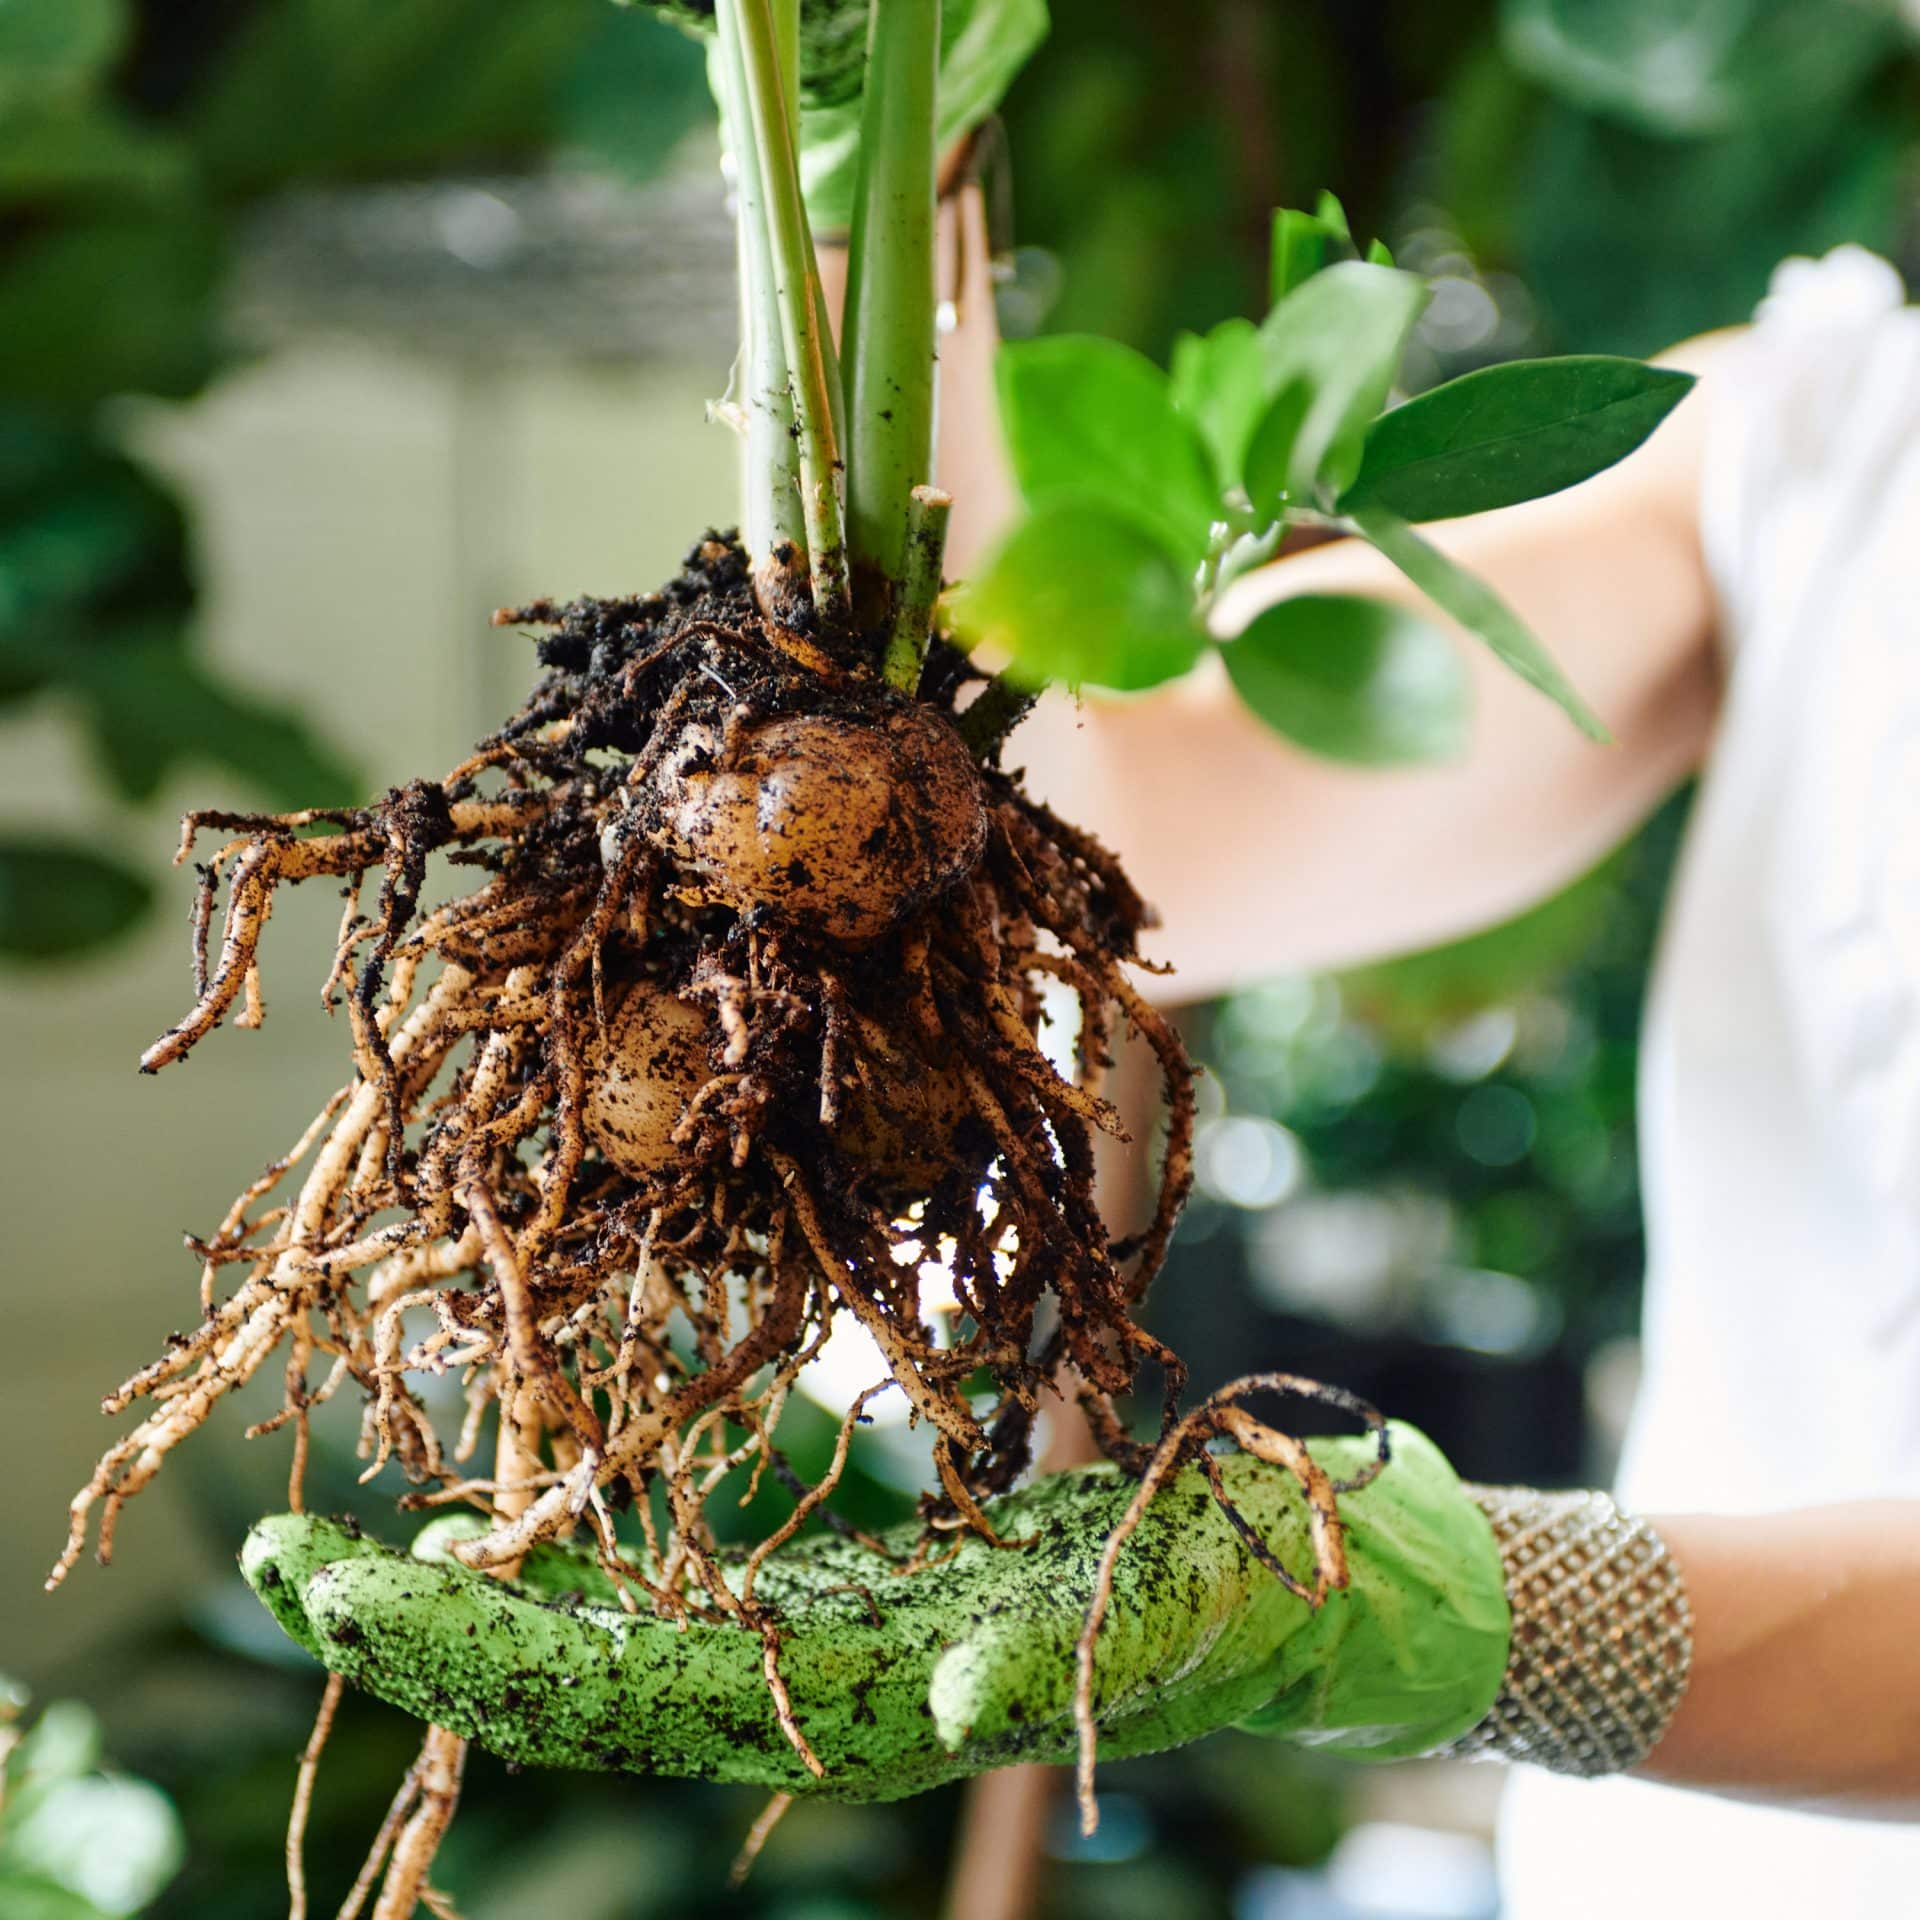 Juliette's hands, covered in green gloves, hold up a ZZ plant showcasing its extensive root system and a prominent bulbous rhizome. The rich, dark soil clings to the roots and rhizome. In the background, lush green foliage of other plants creates a vibrant and natural setting.